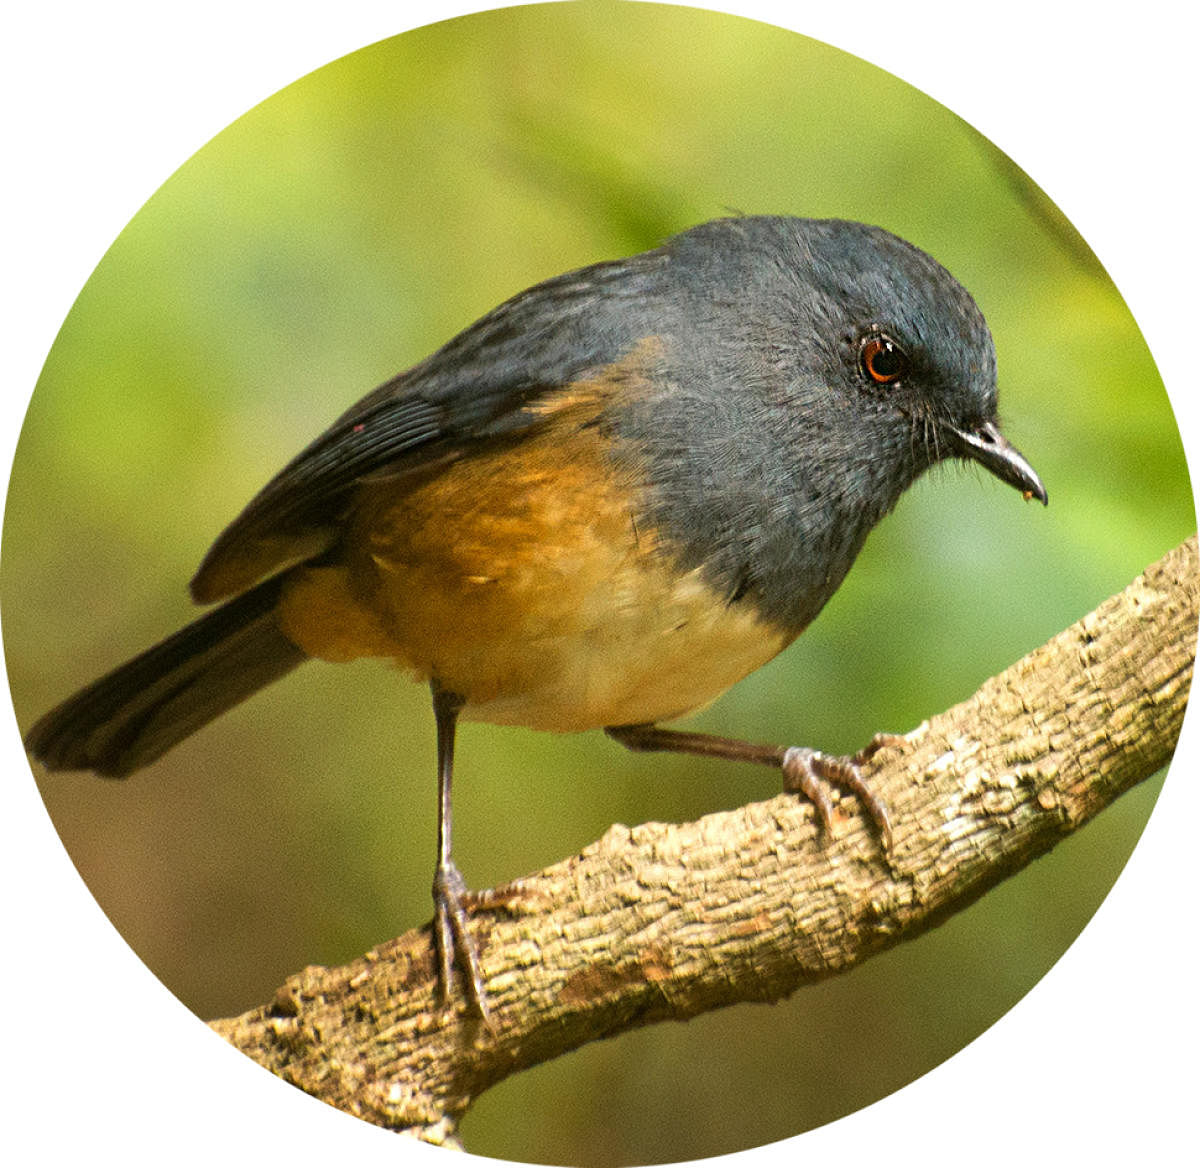 Nilgiri blue robbin (Sholicola major)  This endangered small bird is found on the forest floor of the Shola forests in the Western Ghats at an elevation of over 1200 m.